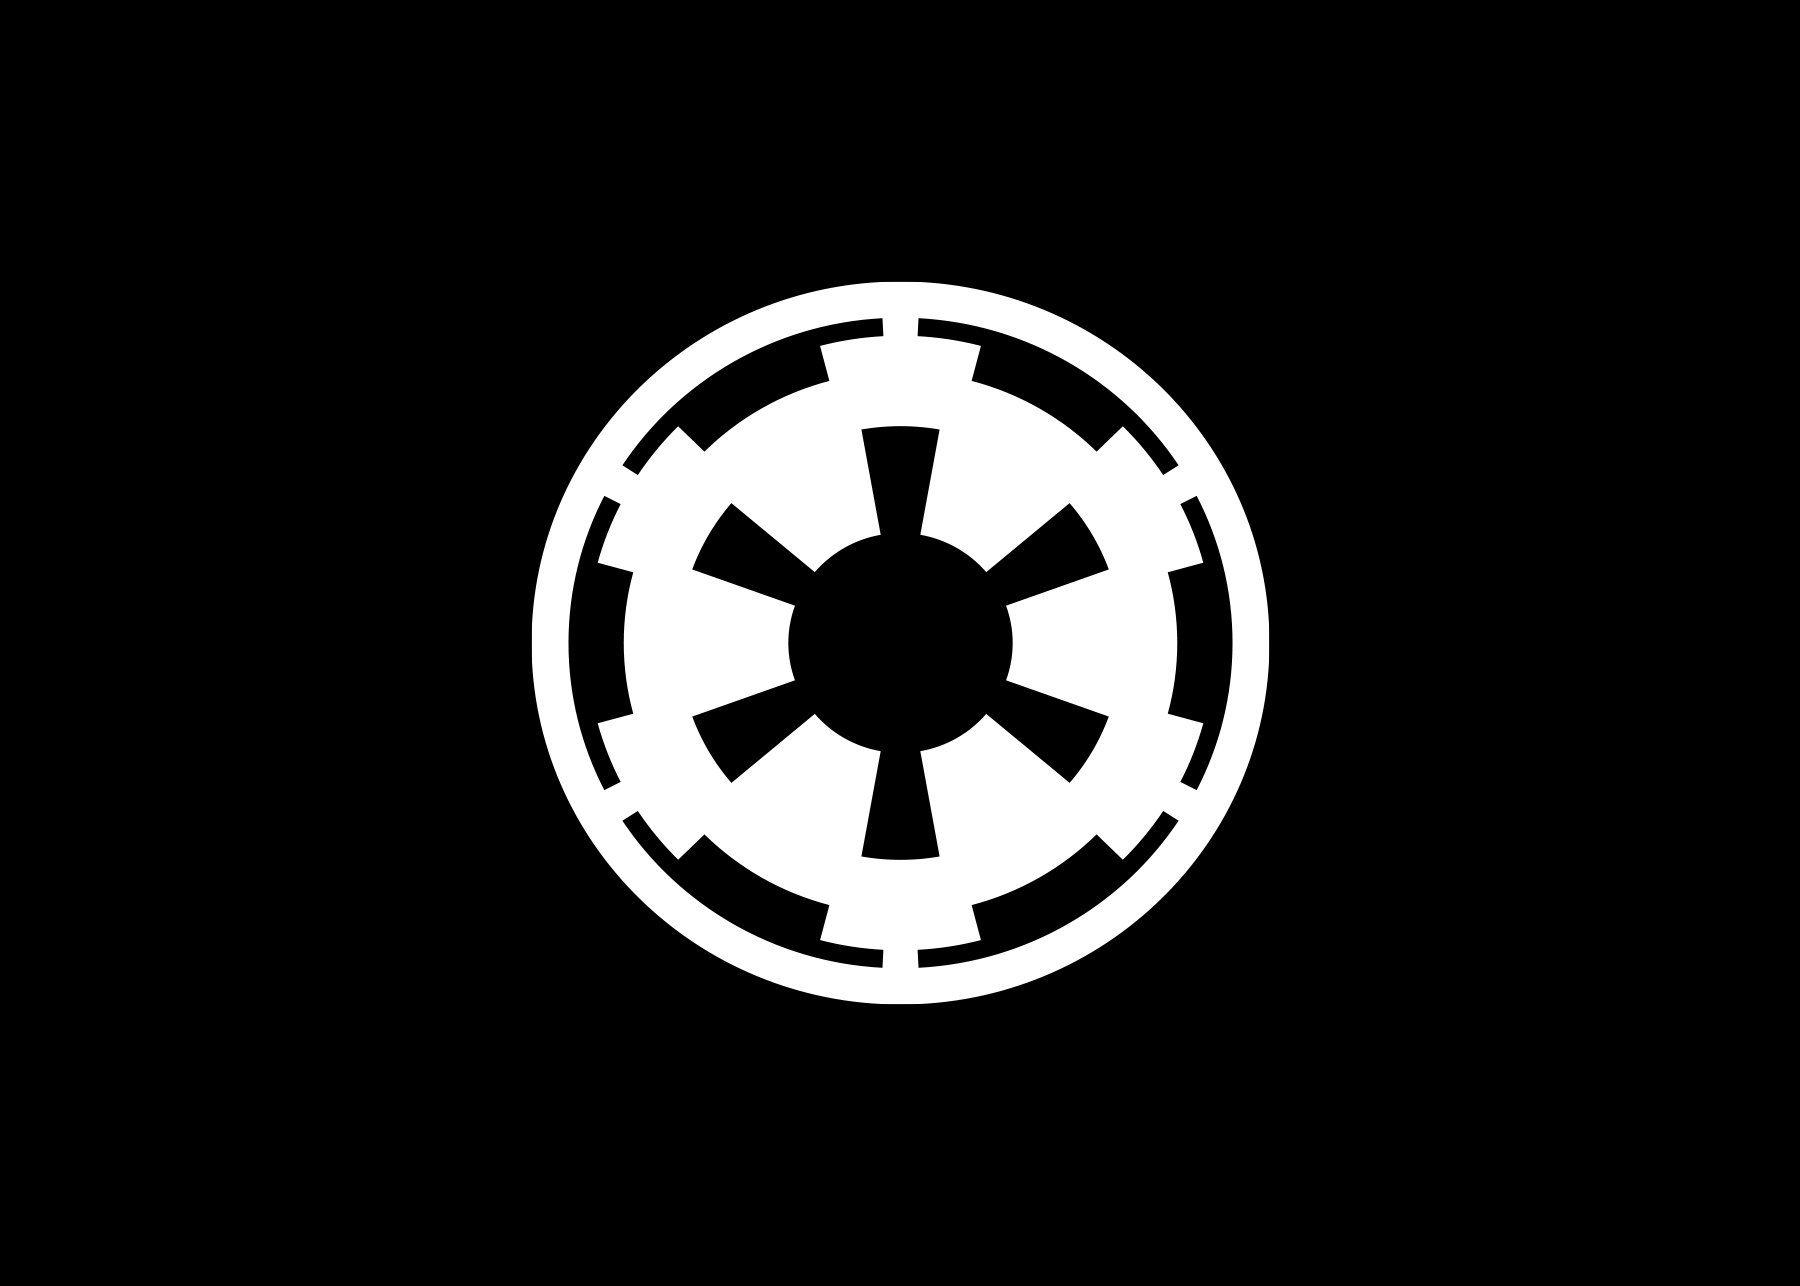 Galactic Empire Logo - Galactic Empire Star Wars Car Decal Sticker | The Decal God